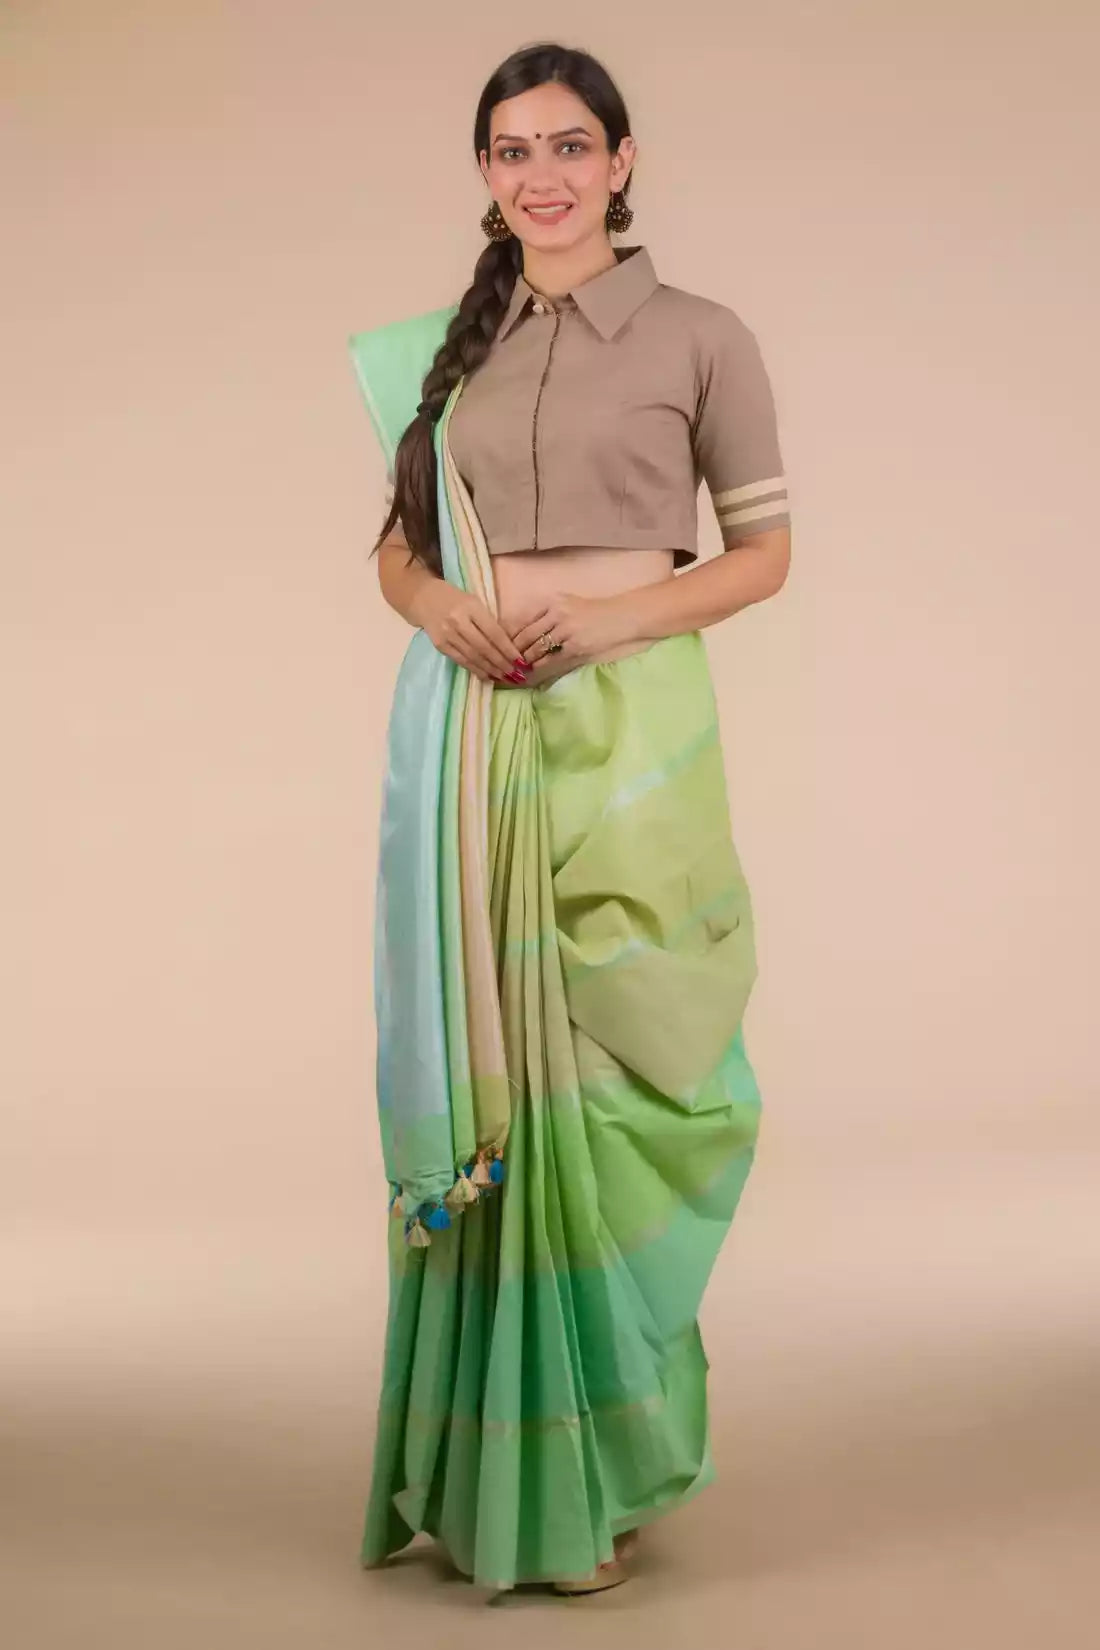 This a photo of beautiful woman wearing a Horizontal stripes Multicolor In Pure Cotton Saree, women workwears is posed in front of a tan background